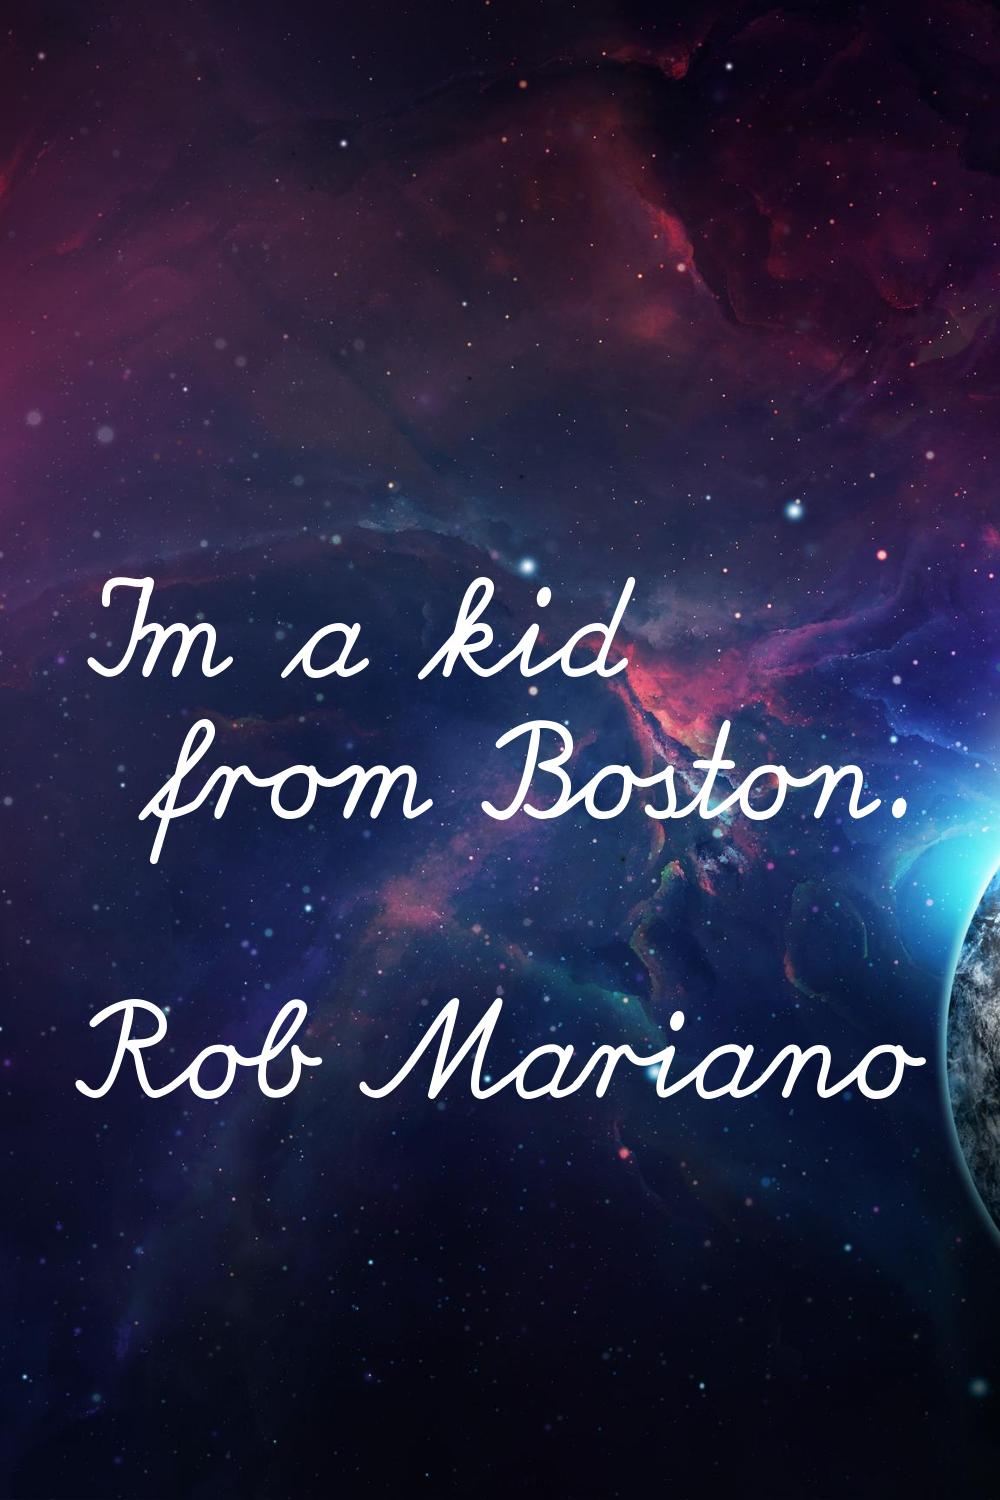 I'm a kid from Boston.